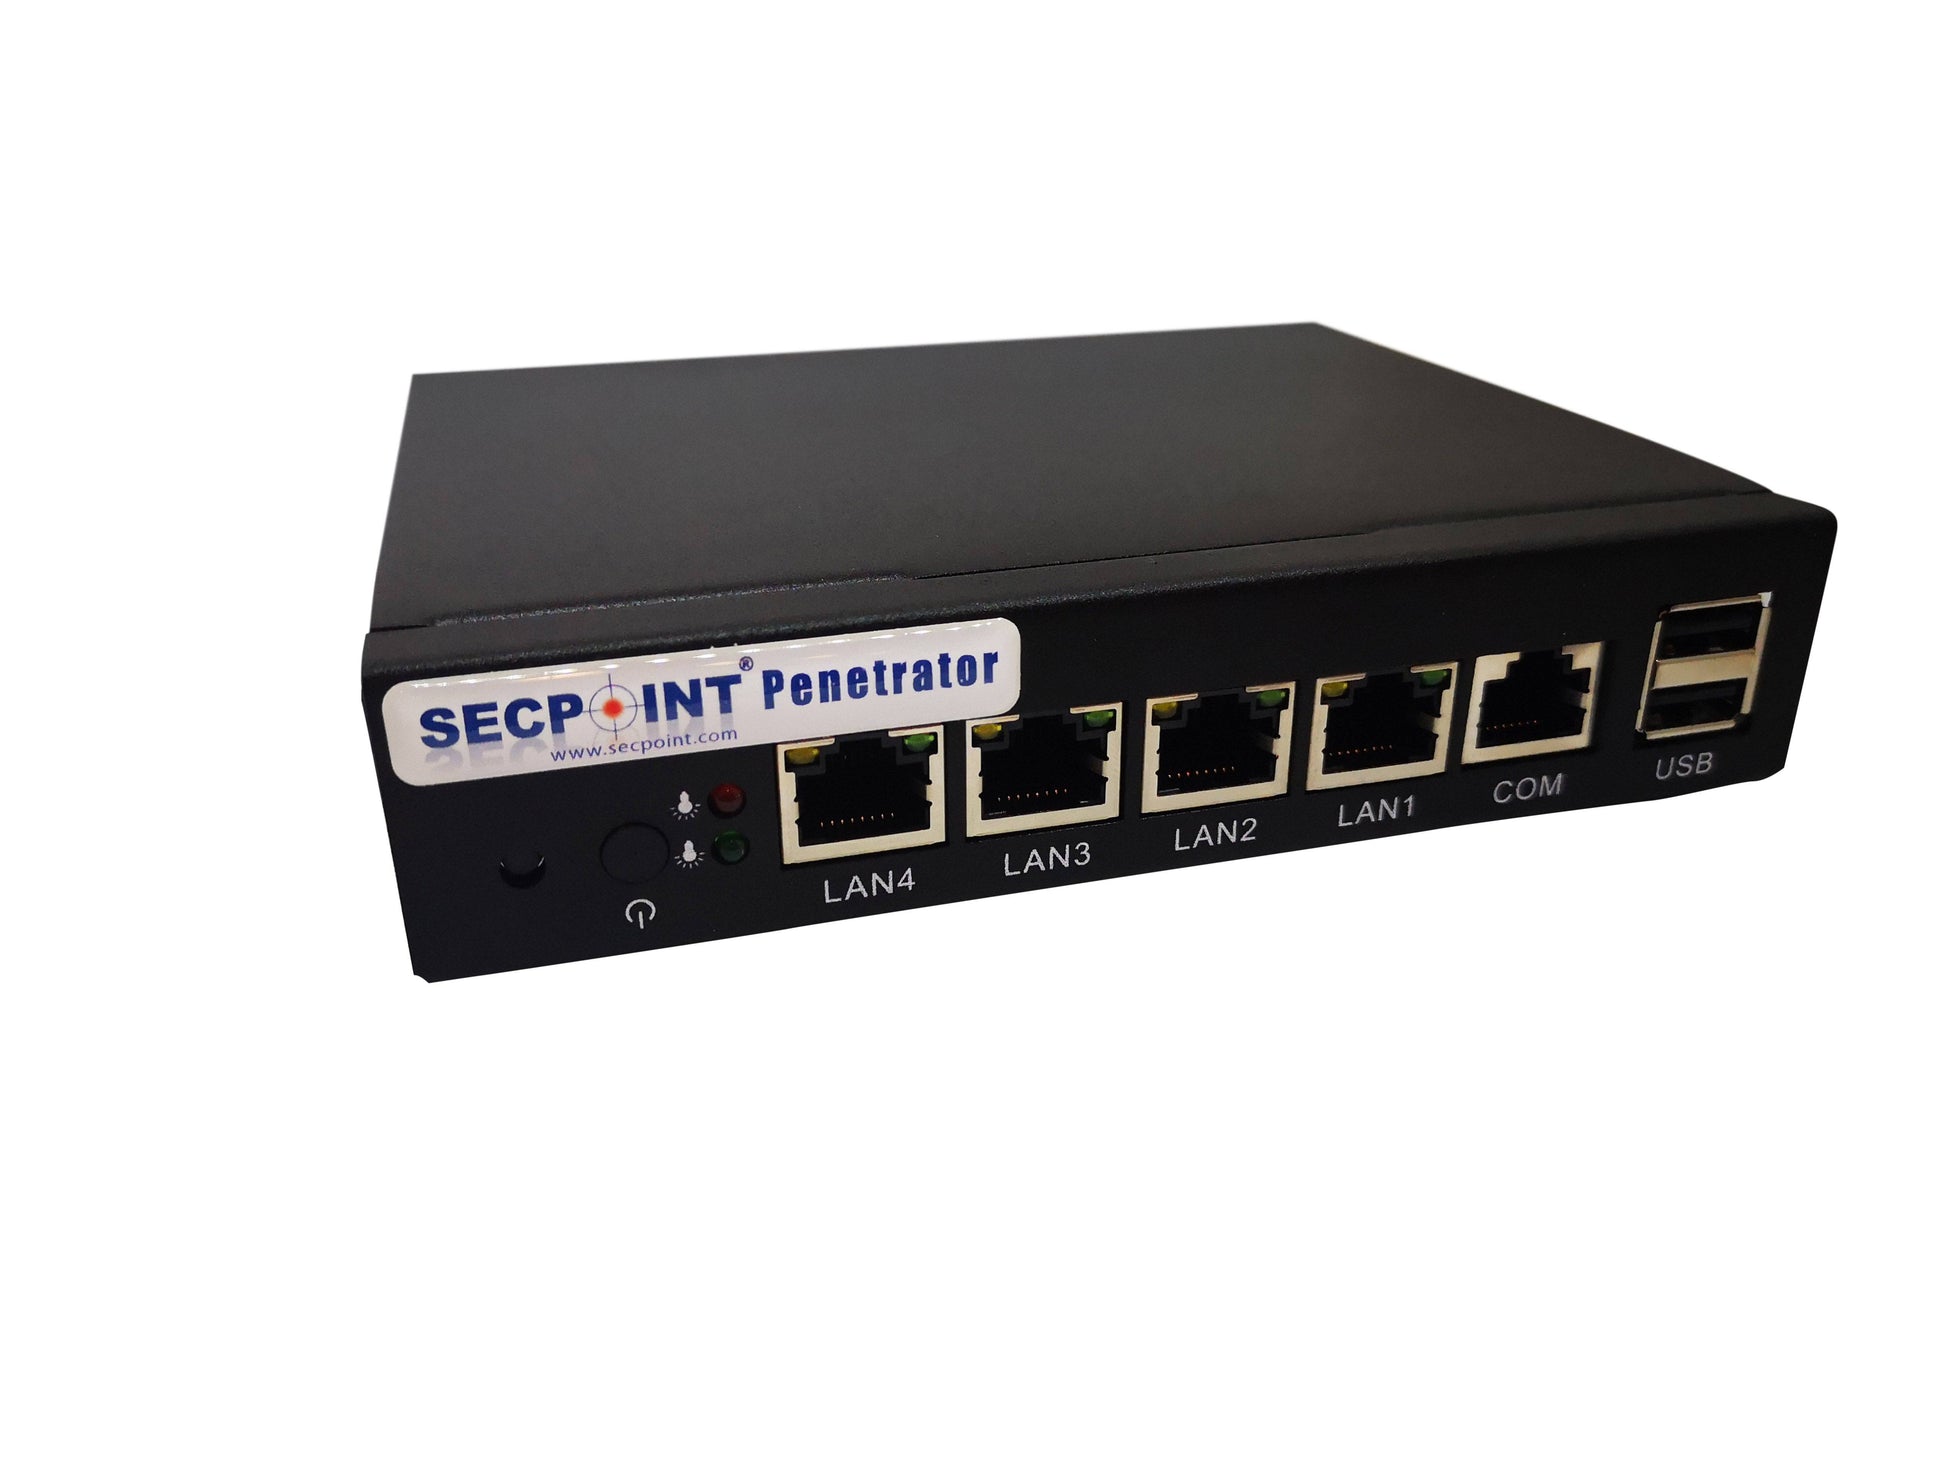 SecPoint Penetrator 8 IP Concurrent Scan License Vuln Scanning Appliance SFF (1 Year License) - SecPoint